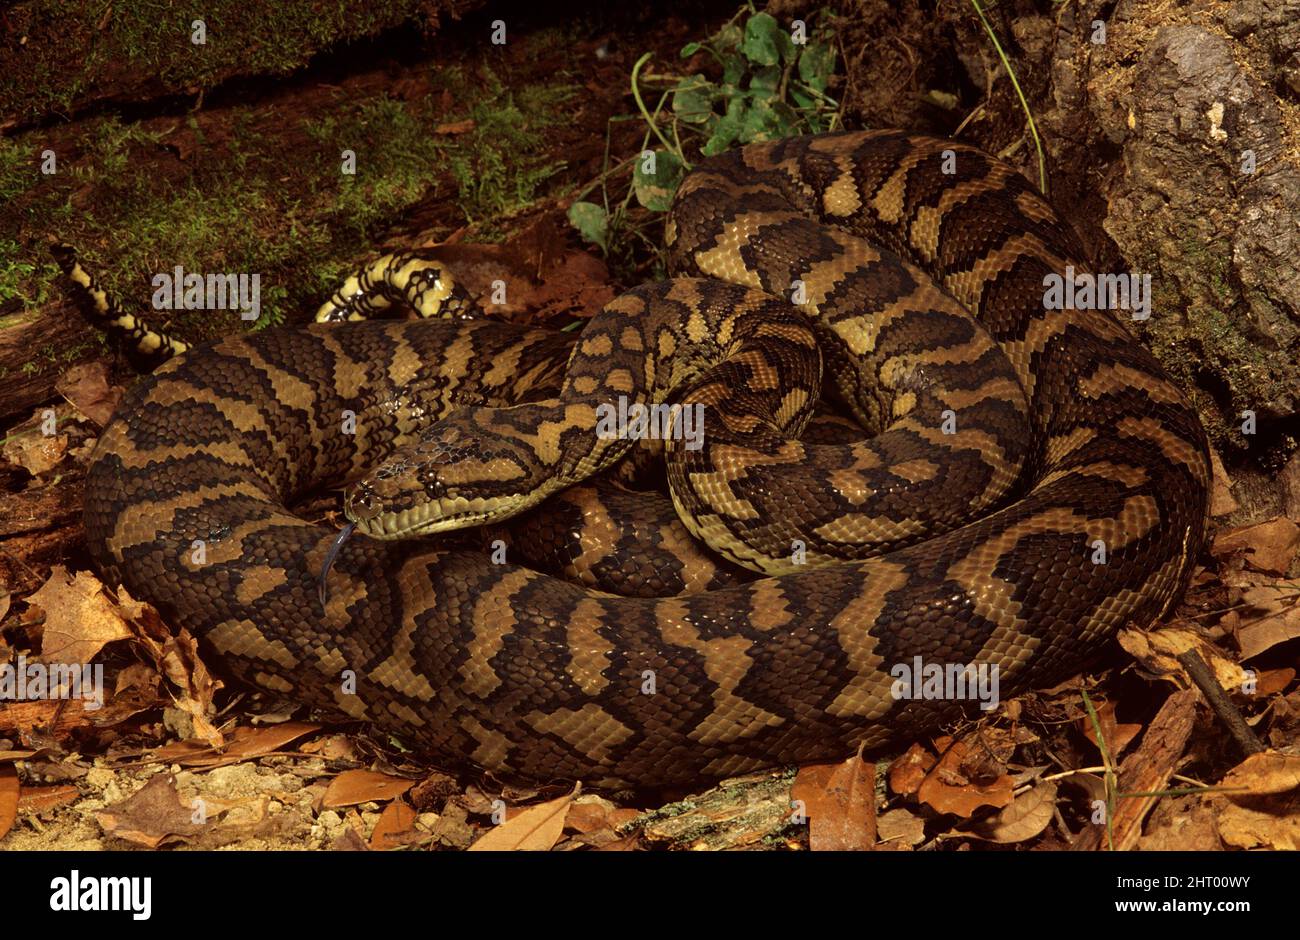 Carpet python (Morelia spilota variegata), coiled on leaf litter with tip of tongue extended. United States Stock Photo